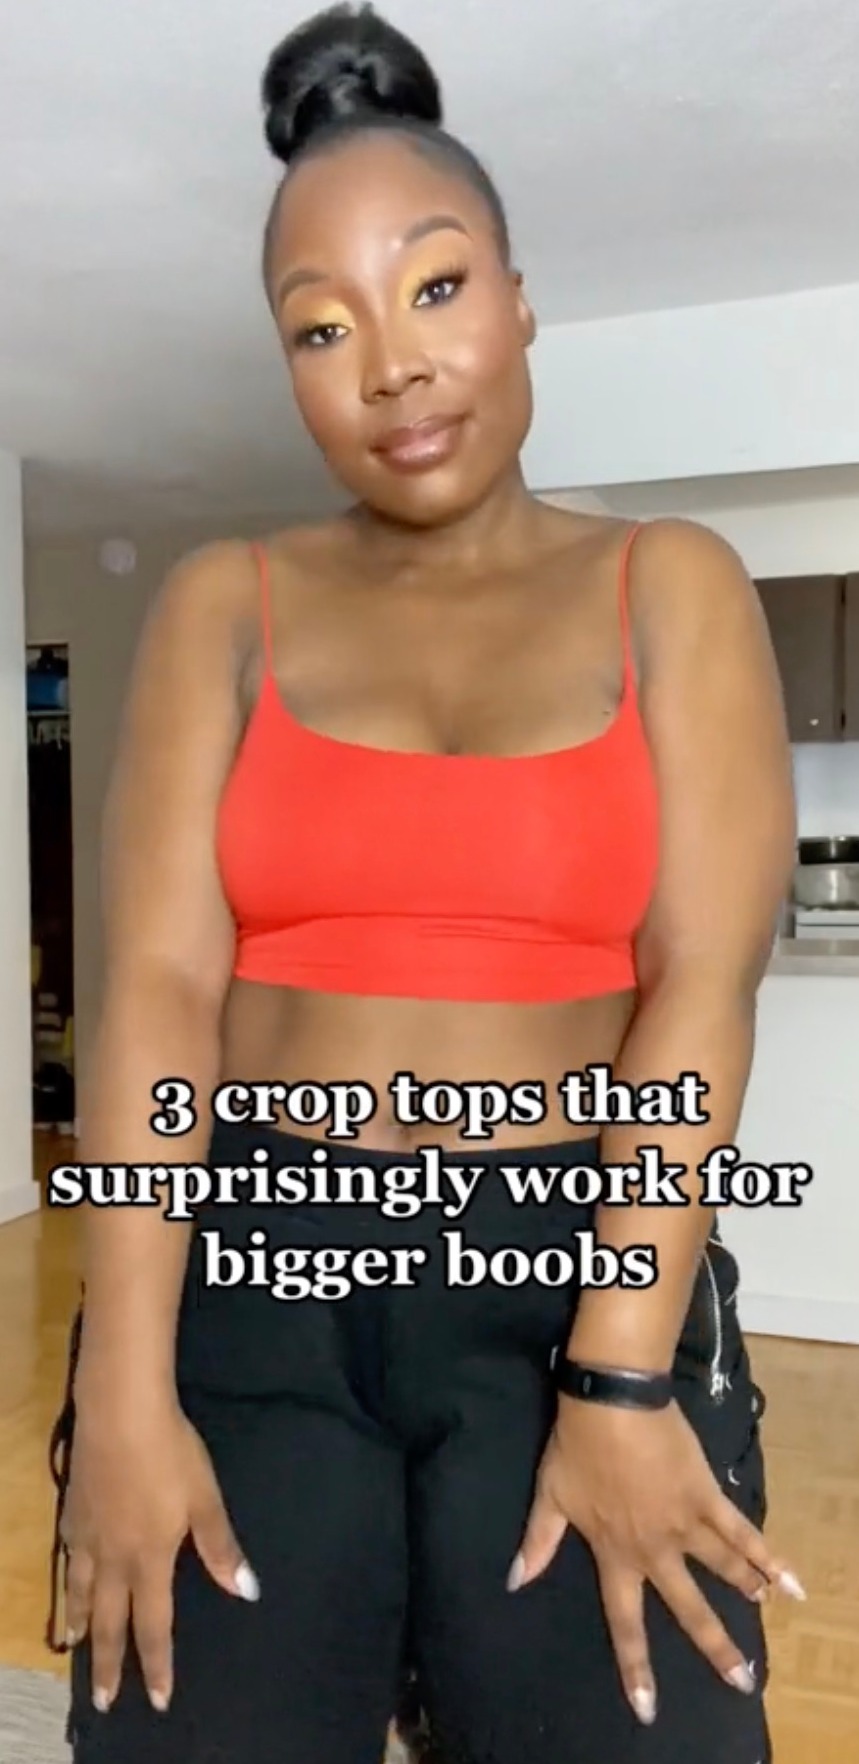 caleb cover recommends crop tops for large breasts pic